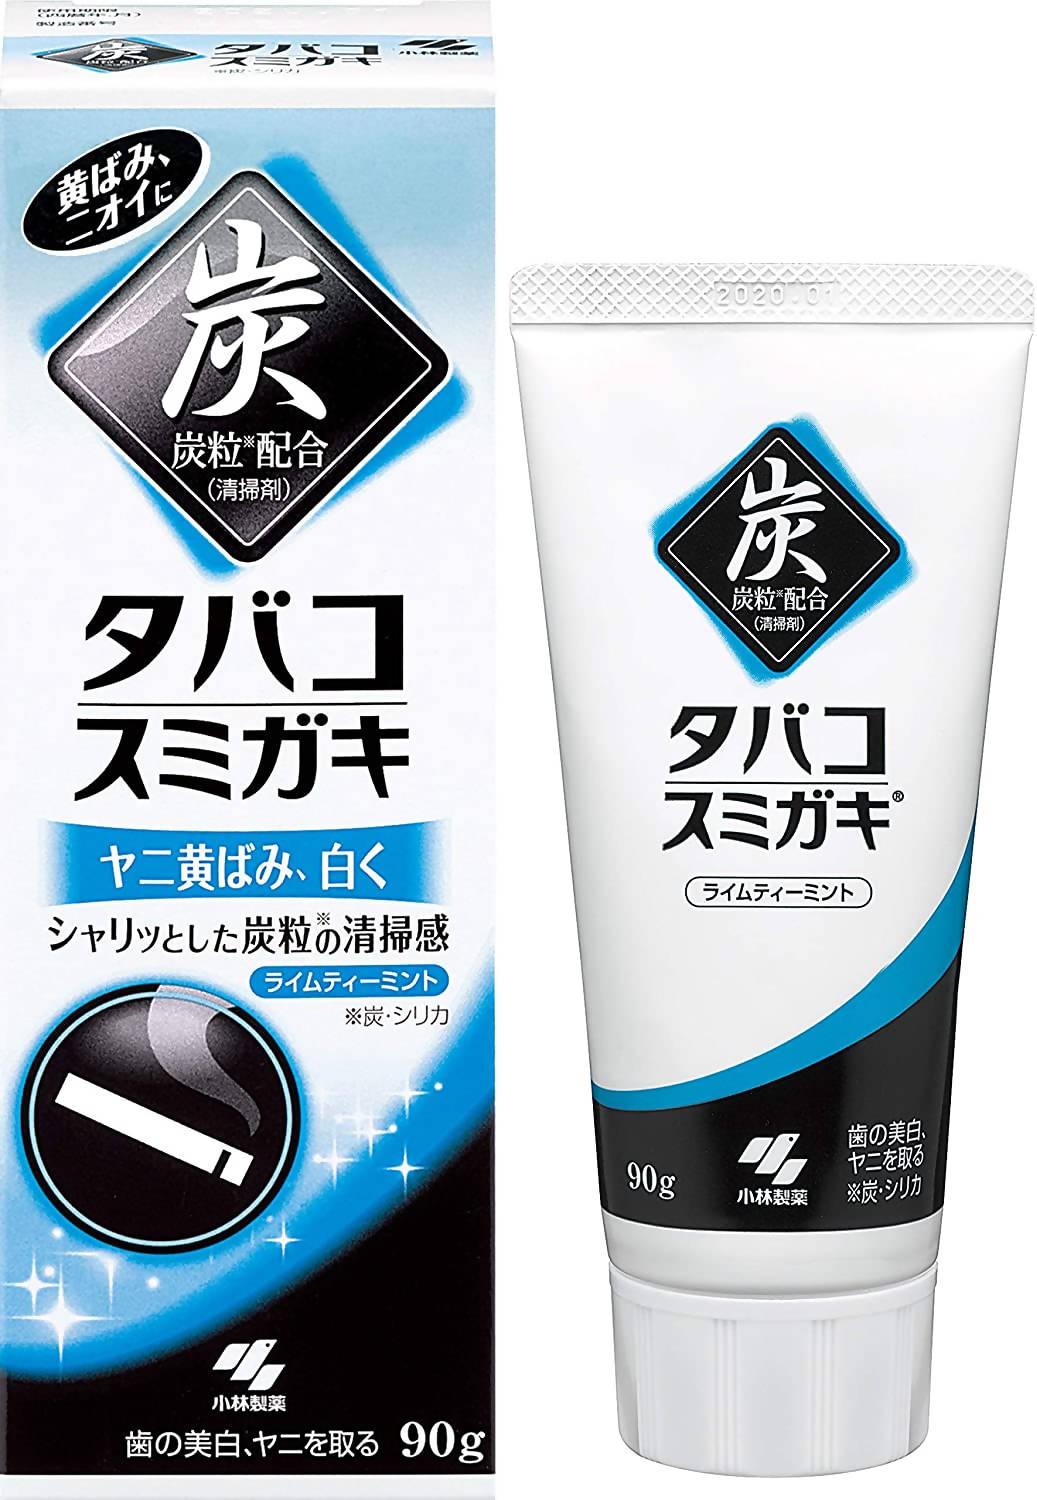 SUMIGAKI Charcoal Toothpaste – 4 Tubes Value Pack – 100g x 4